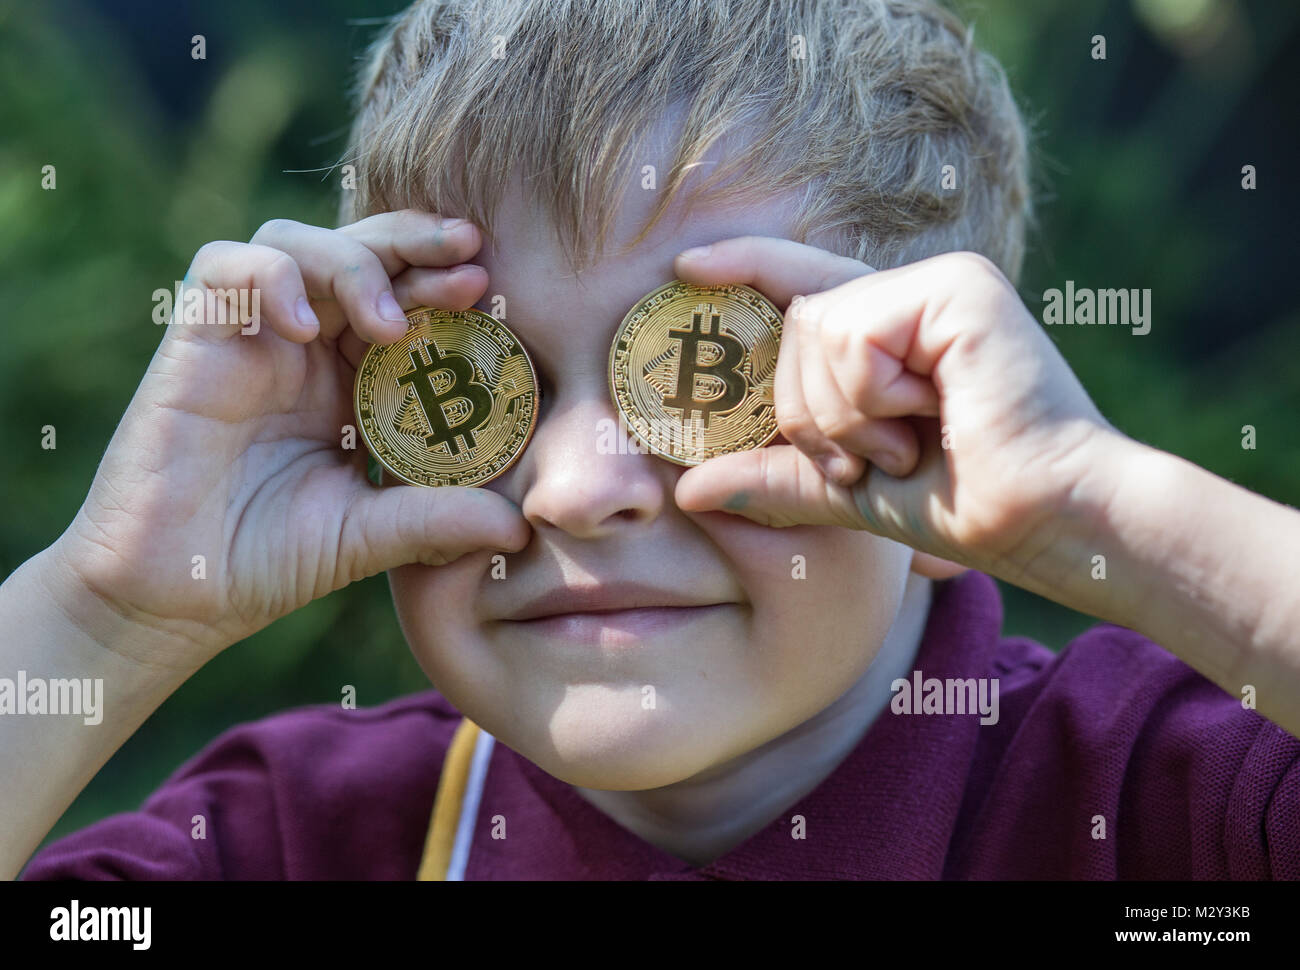 Boy holding Bitcoins up to his eyes Stock Photo